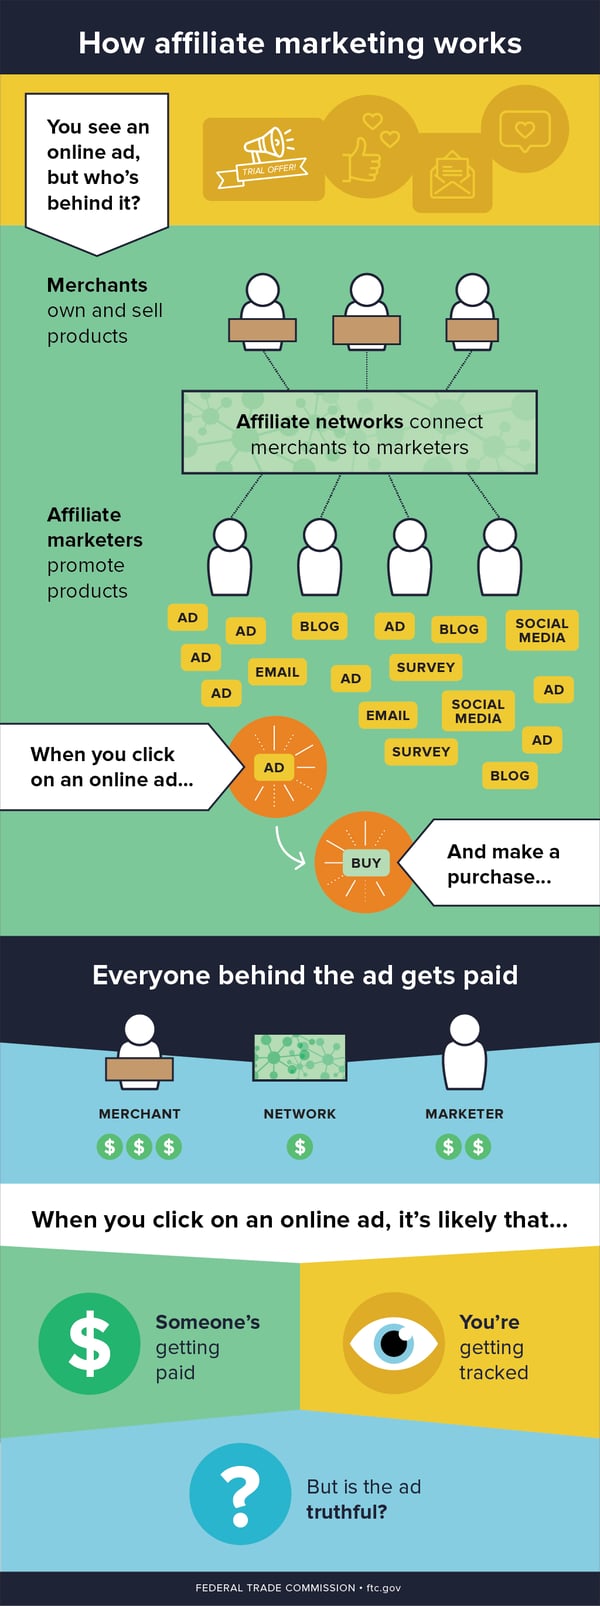 how-affiliate-marketing-works-1-1